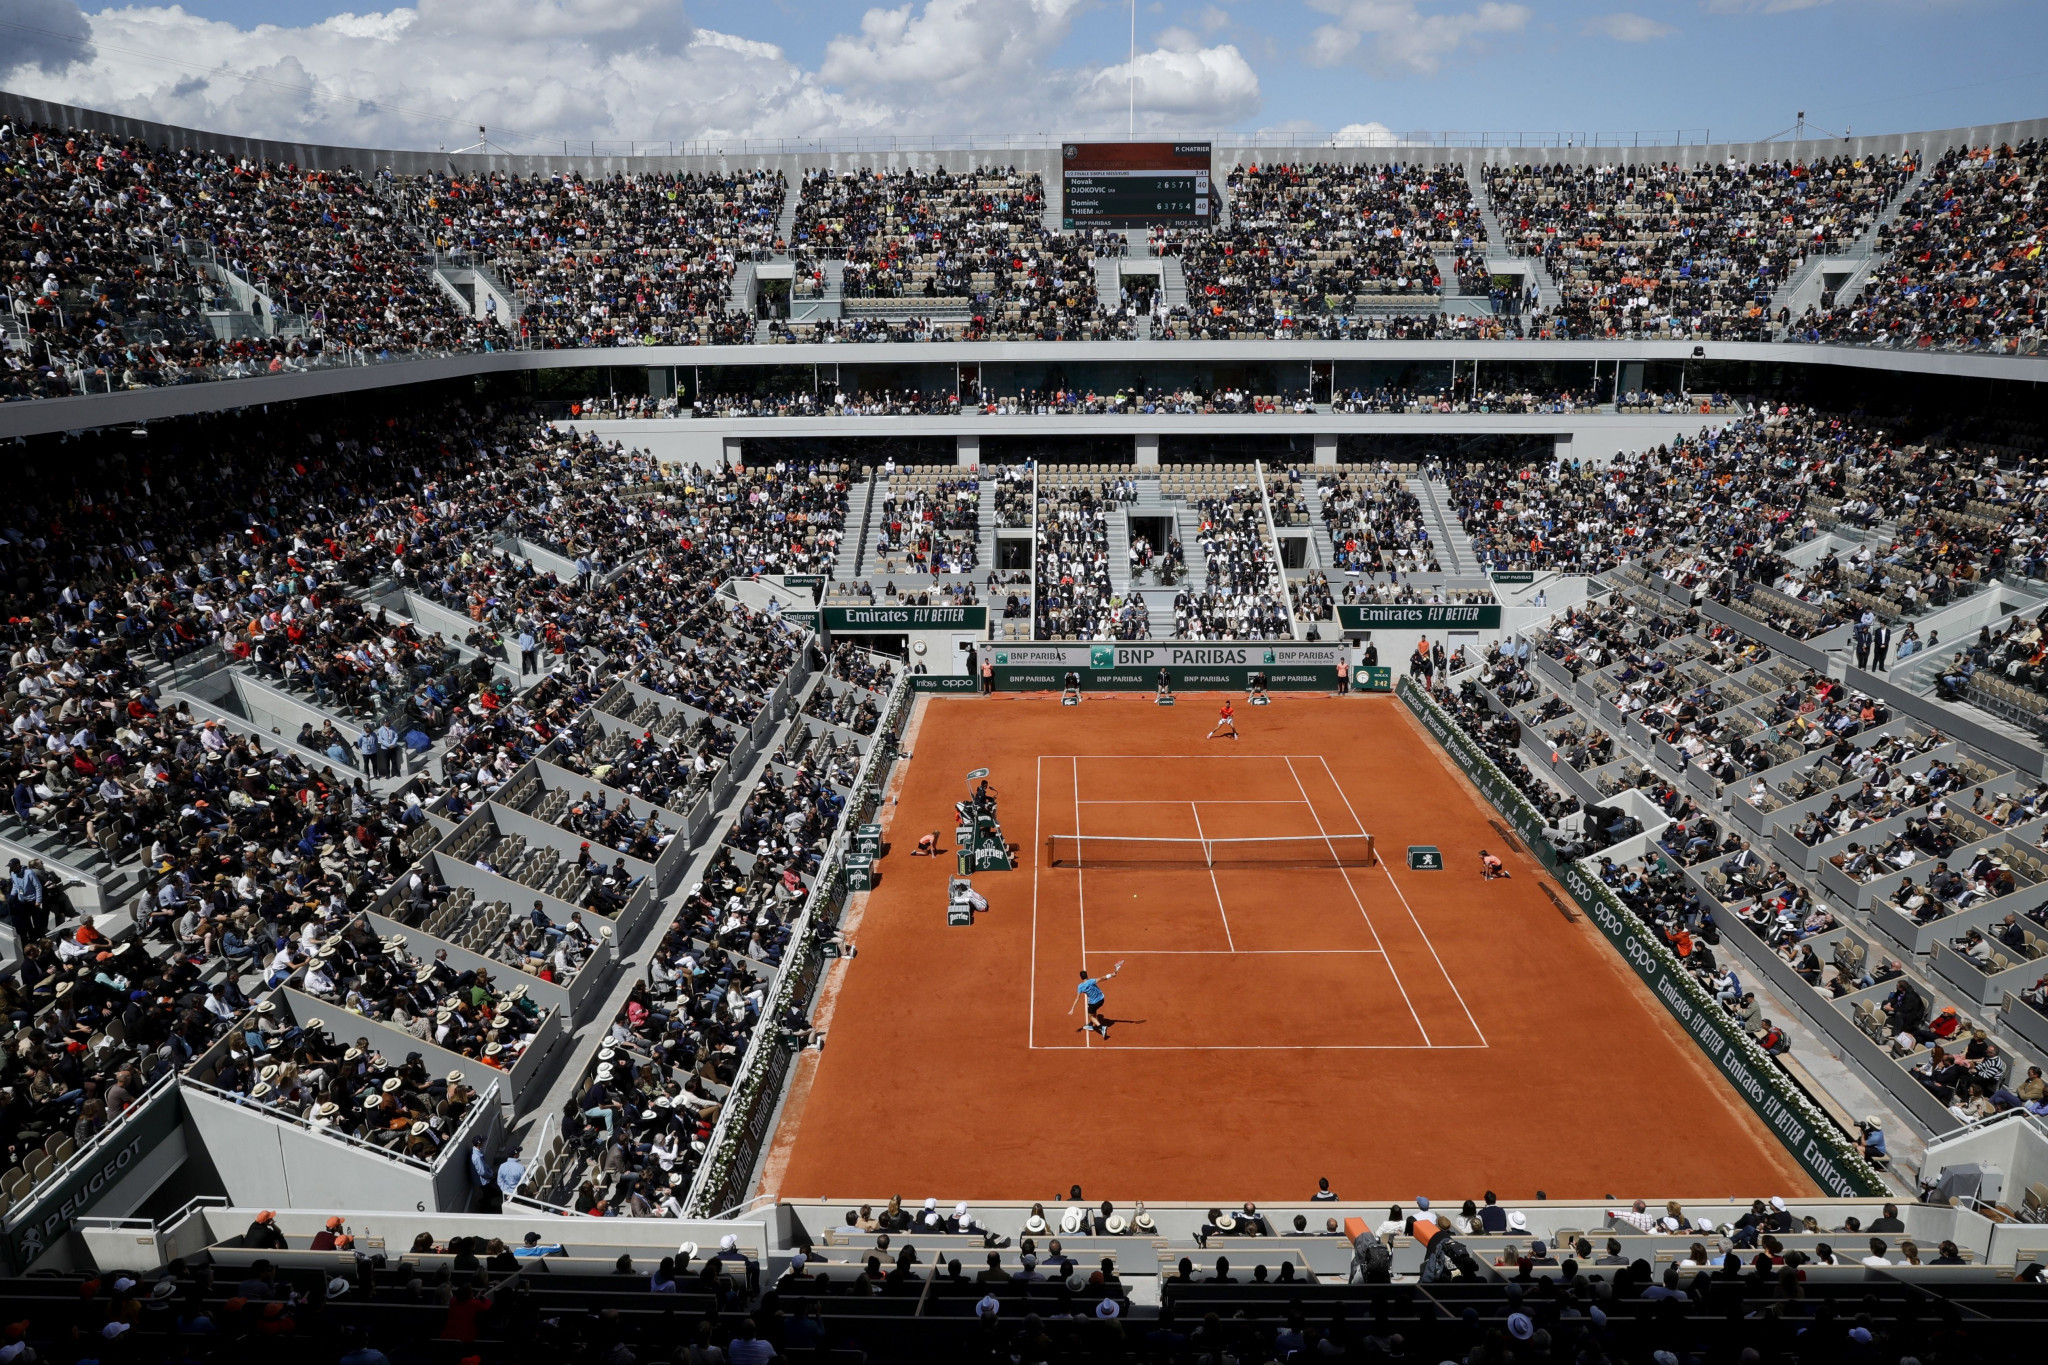 Tennis bodies set to financially support players affected by coronavirus pandemic